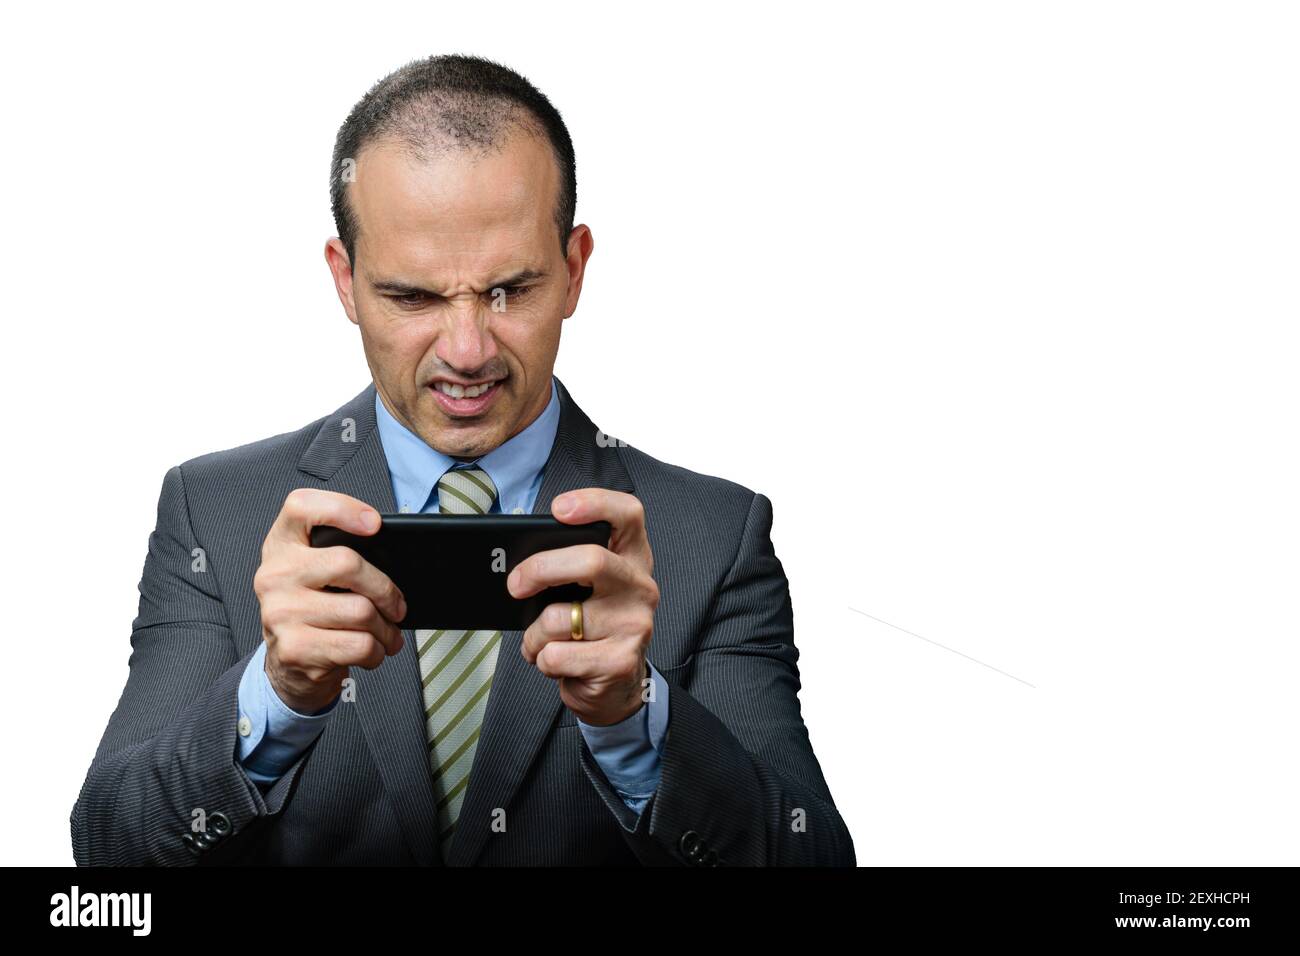 Mature man with suit and tie, playing on his smartphone and gritting his teeth. Stock Photo